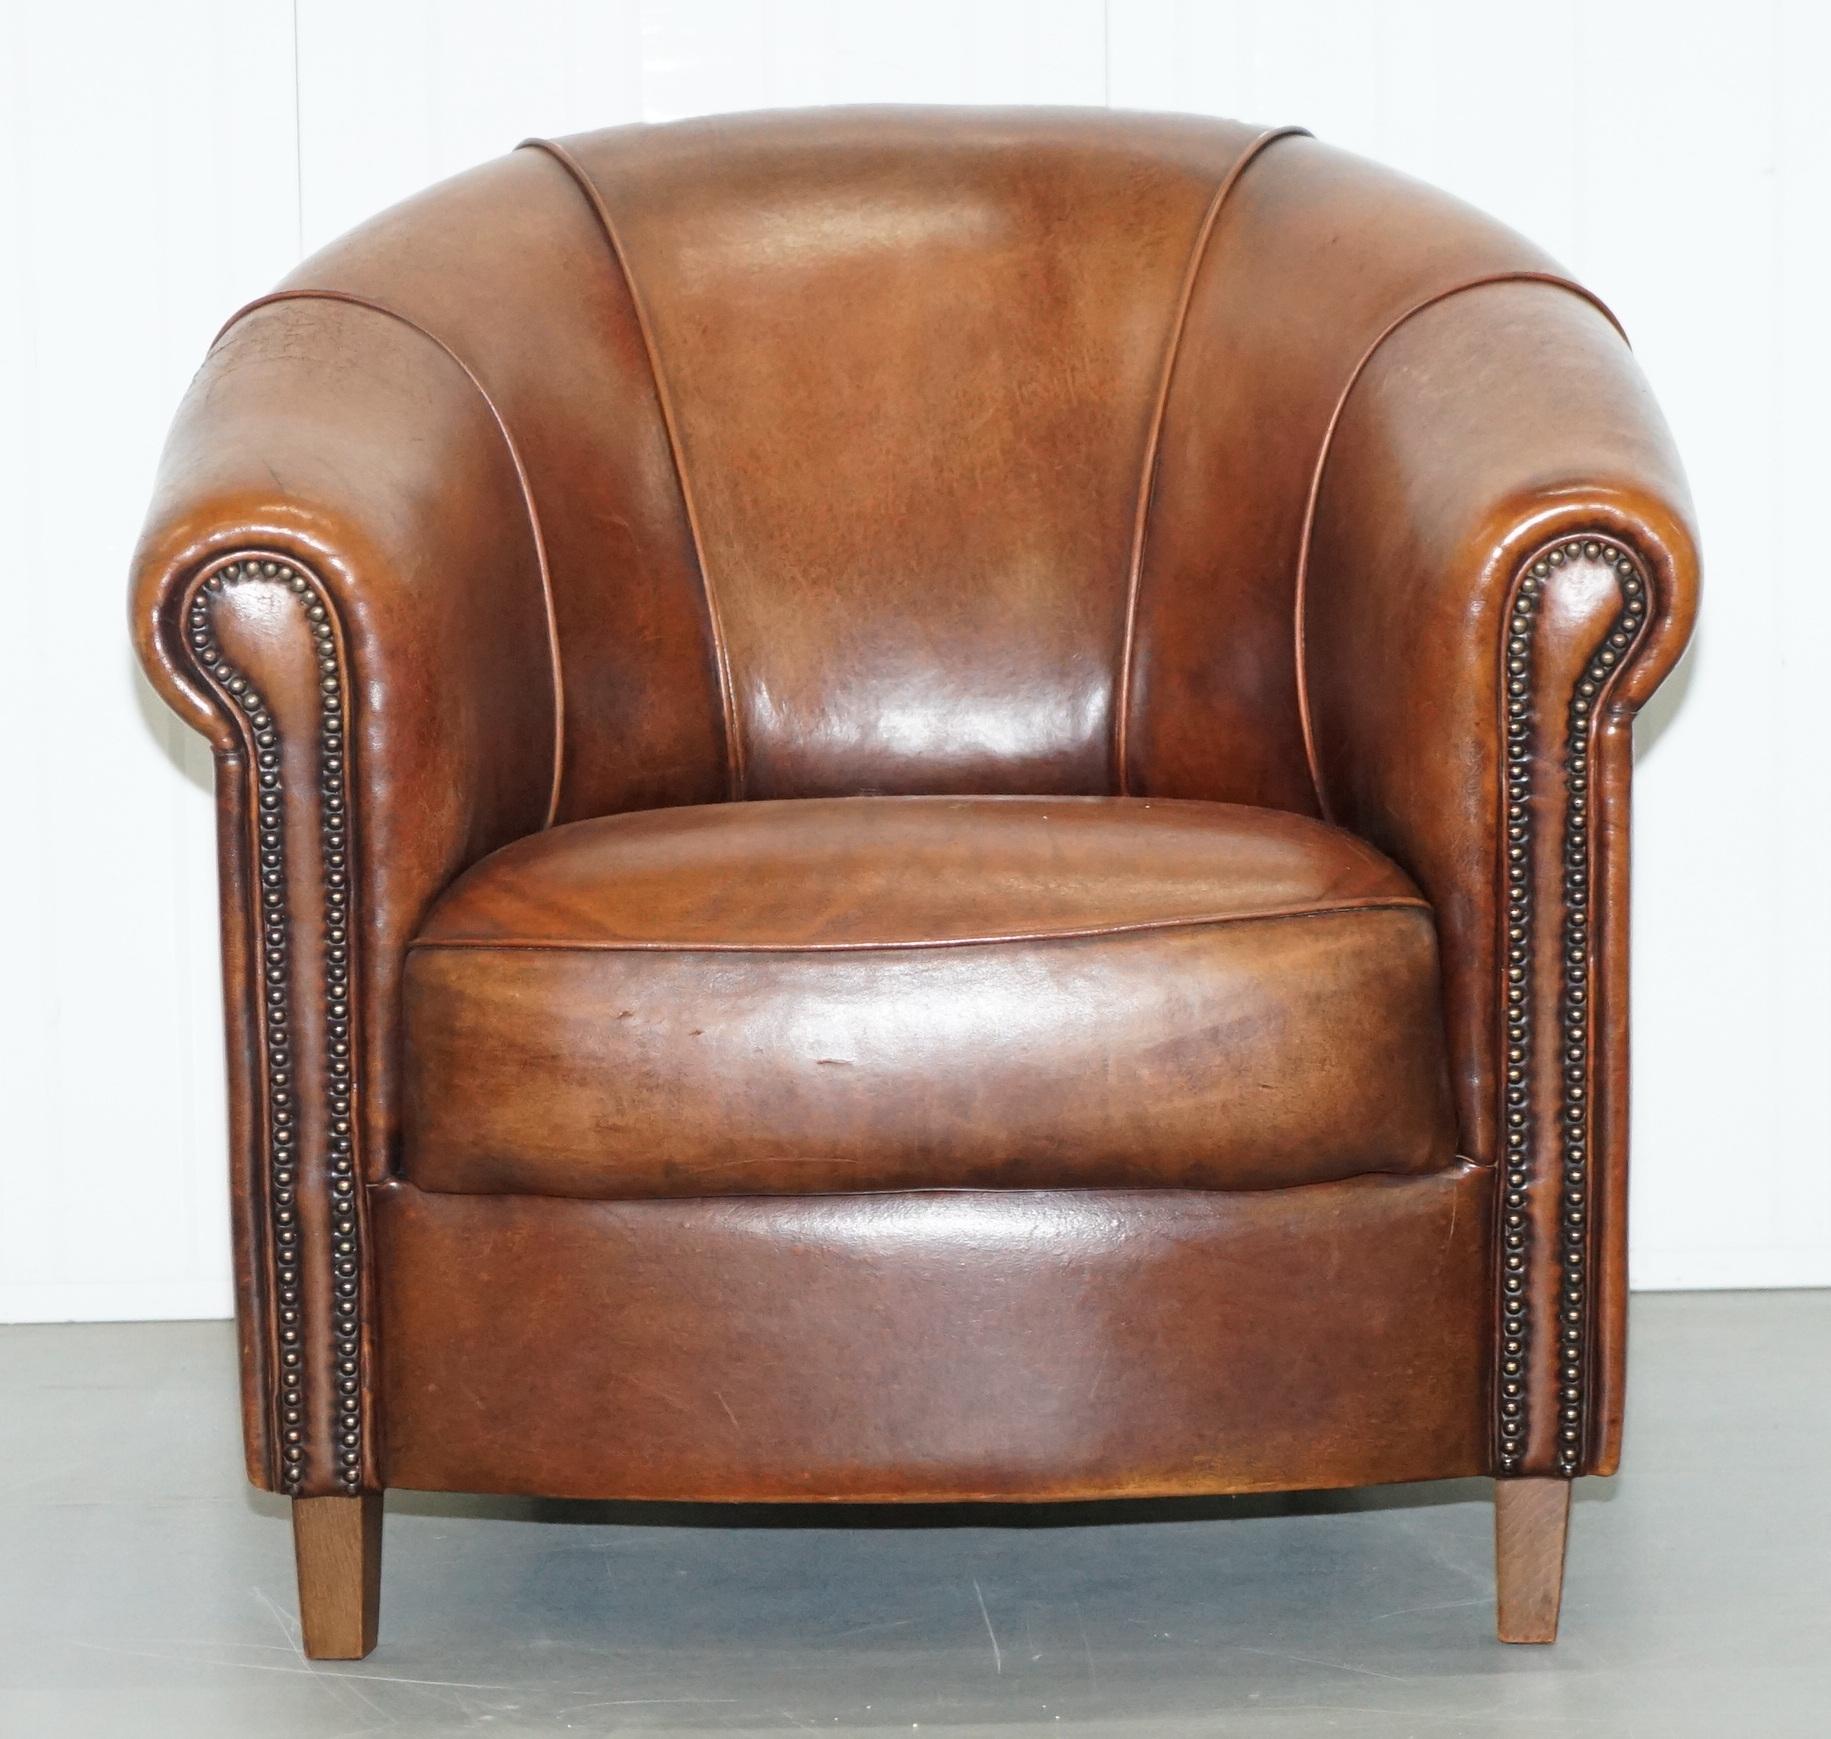 We are delighted to offer for sale this very Studio Joris De Groot handmade in the Netherlands club tub armchair 

Each piece from Jori's studio is part of a limited production run, you won’t see many of these around, maybe one armchair will pop